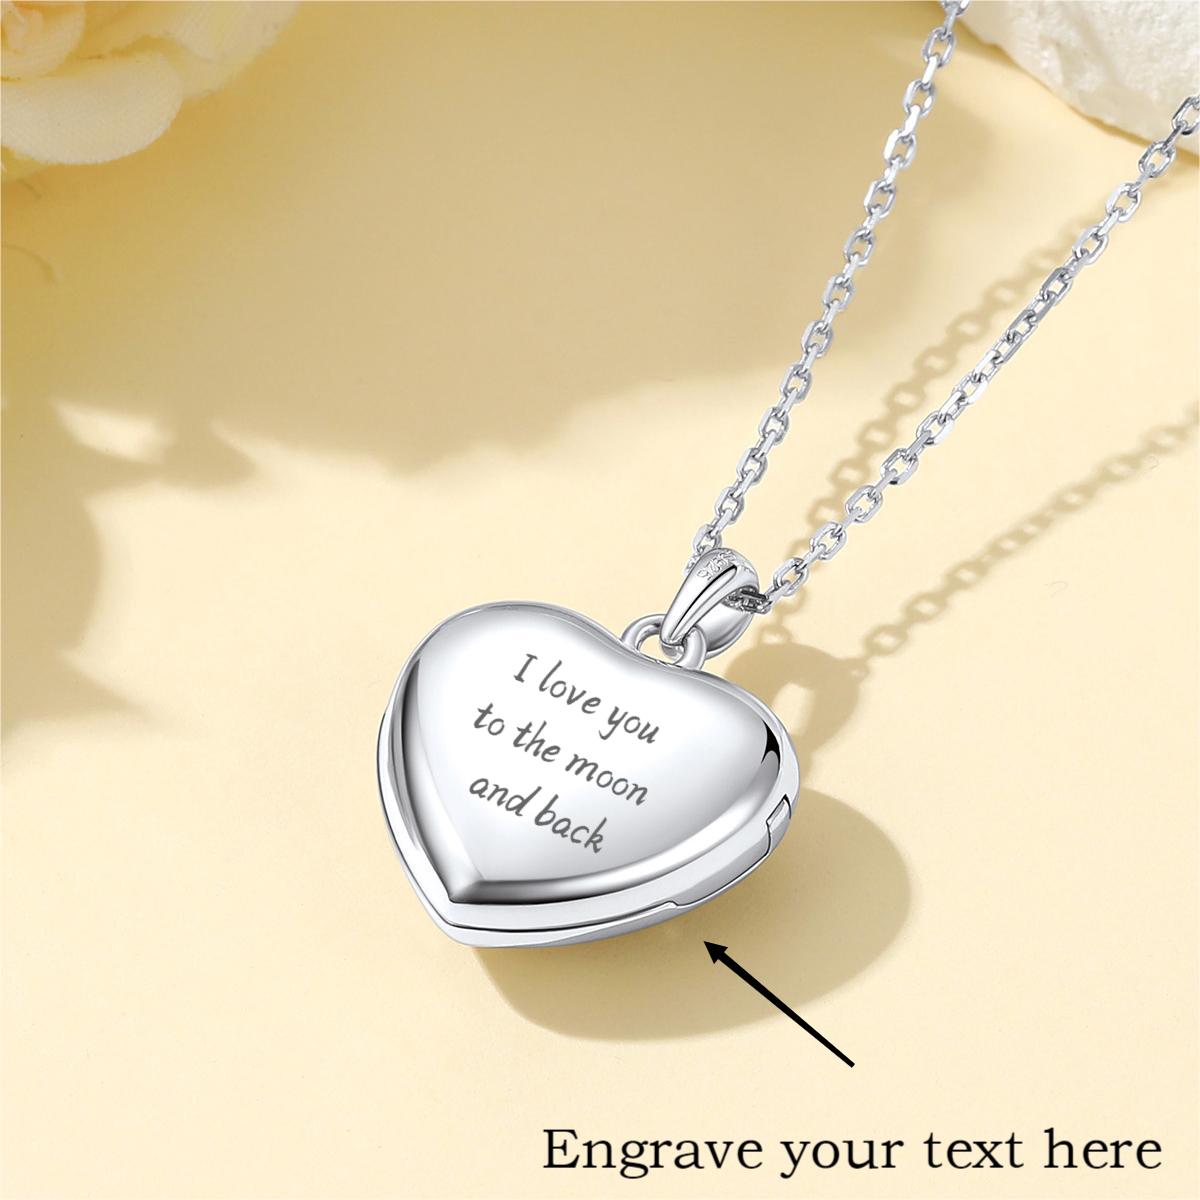 Custom4U Personalized Locket Photo Necklace with Message Engraved On